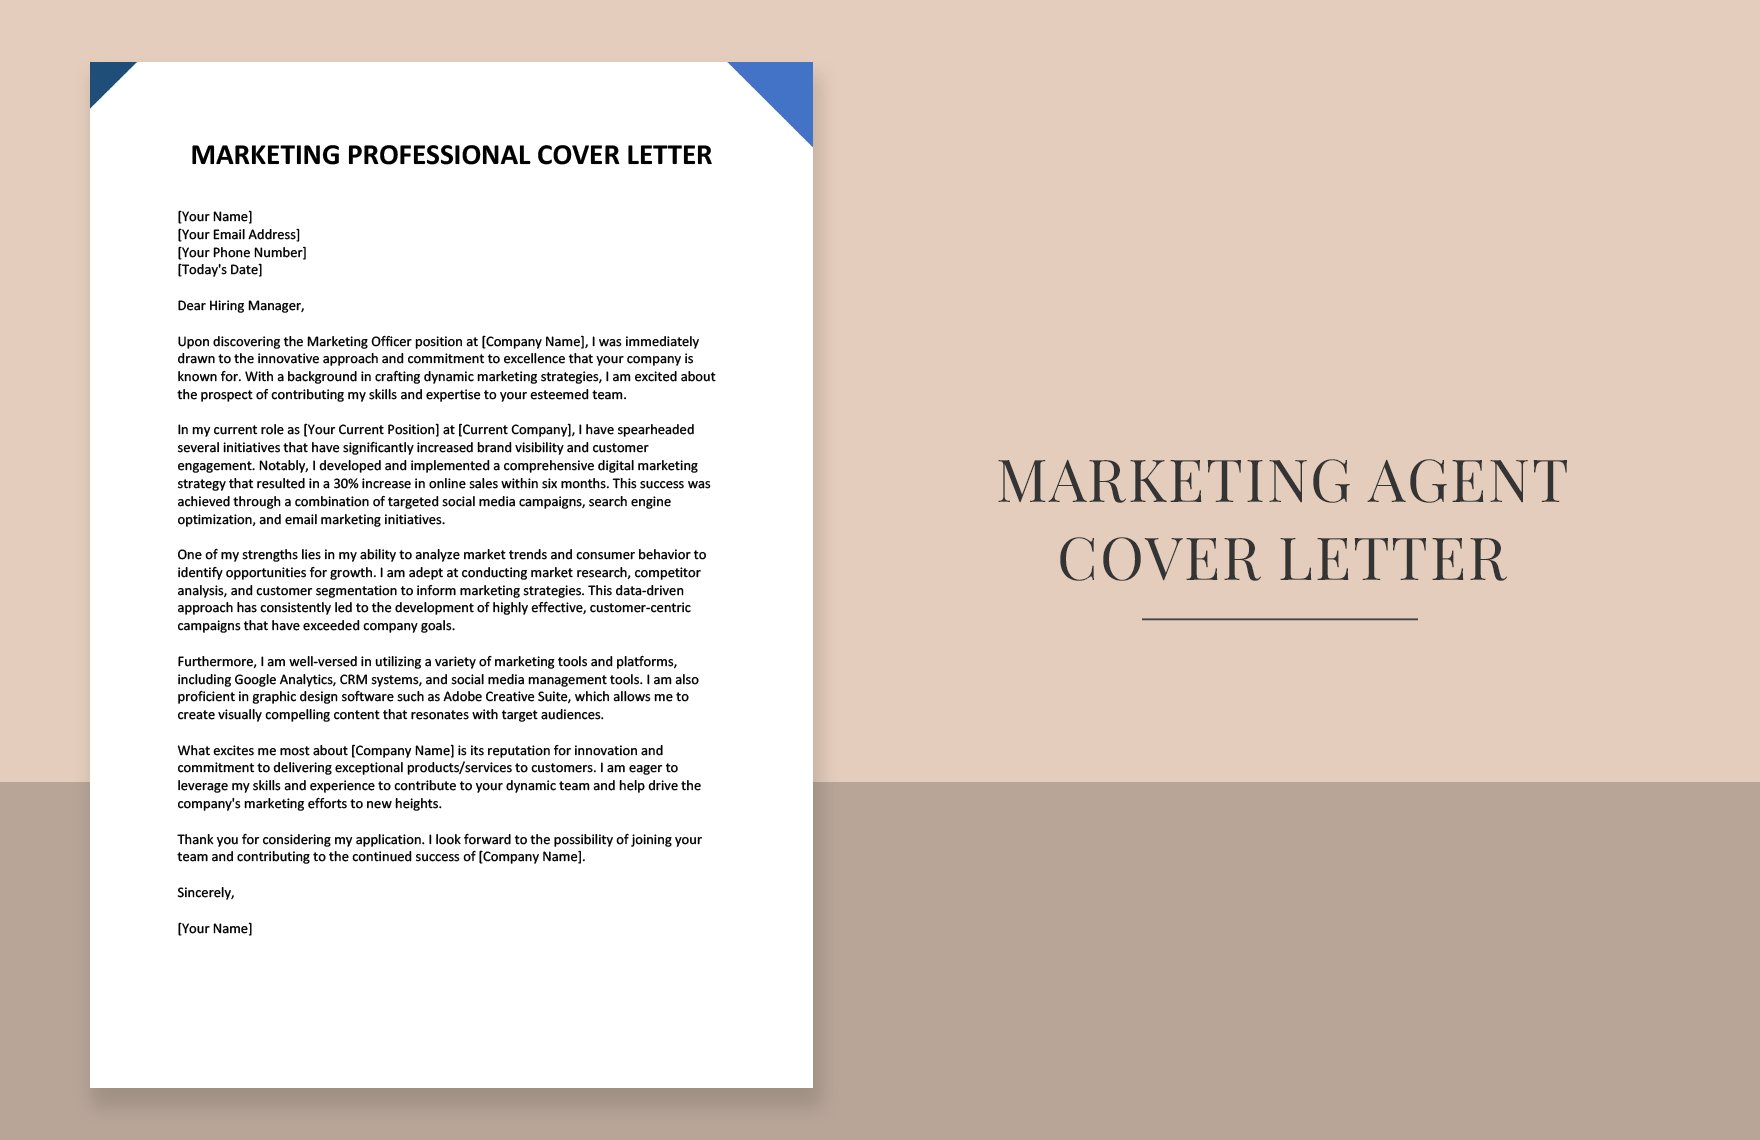 Marketing Professional Cover Letter in Word, Google Docs